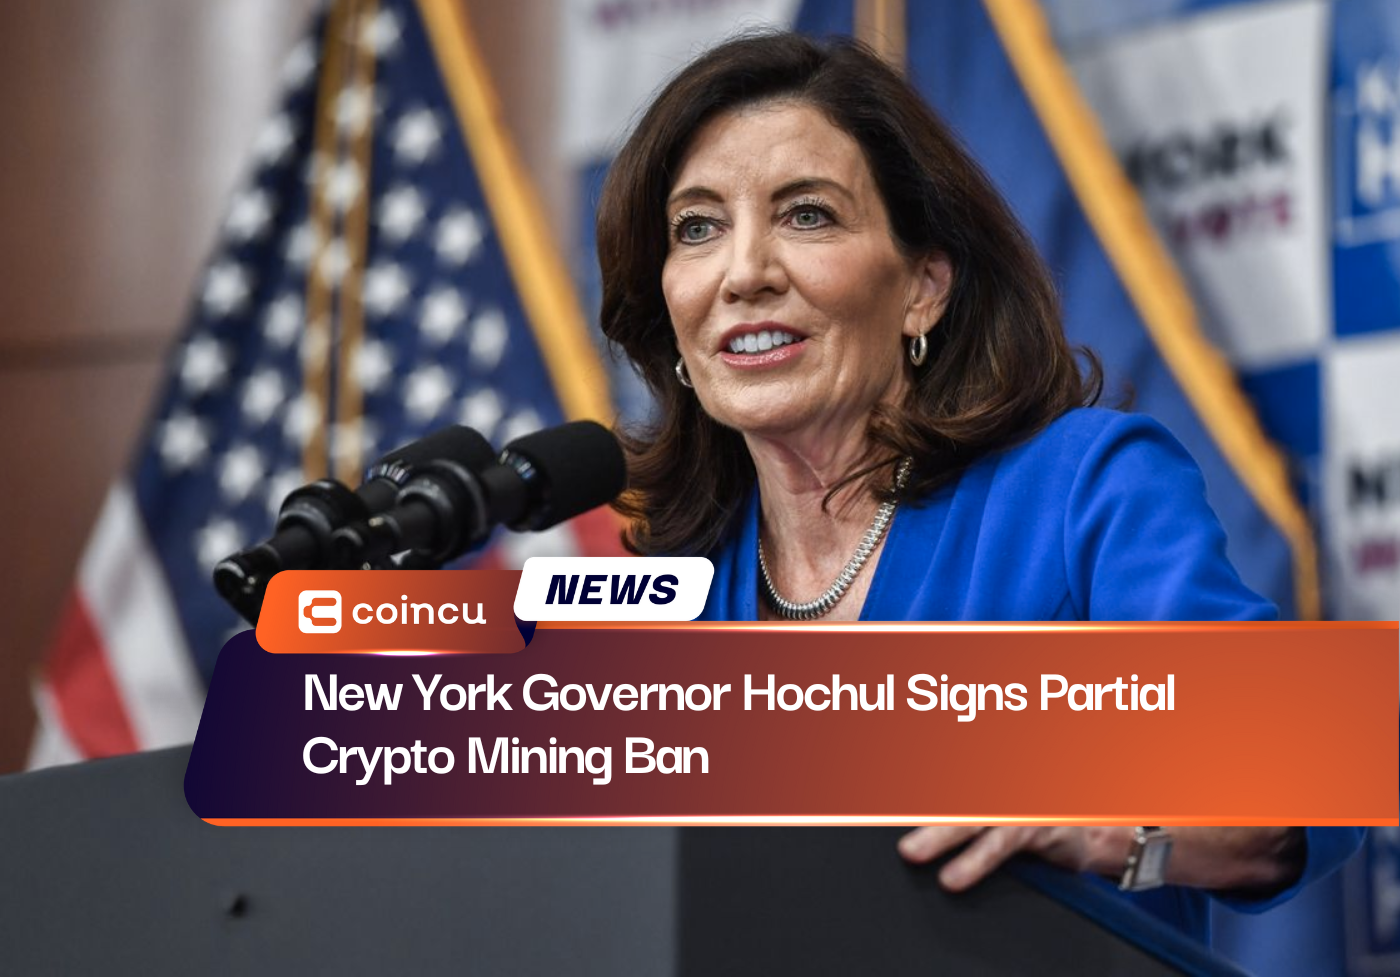 New York Governor Hochul Signs Partial Crypto Mining Ban